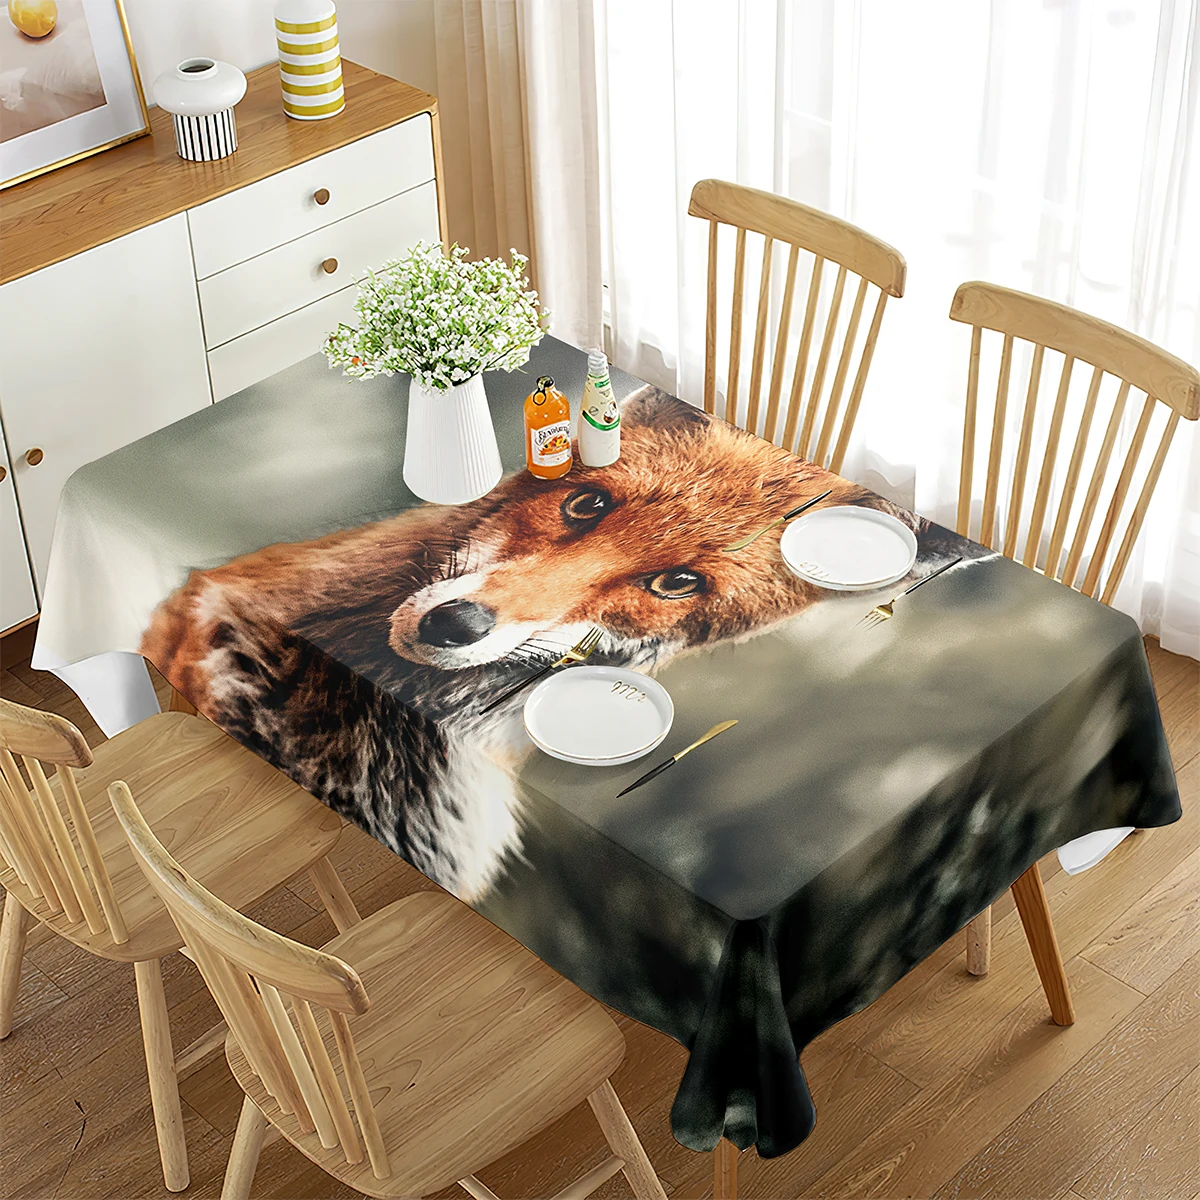 

Fox Tablecloth Sly Fox Wild Animals Theme Home Decor Rectangle Tablecloth Kitchen Dining Room Living Room Banquet Get Together